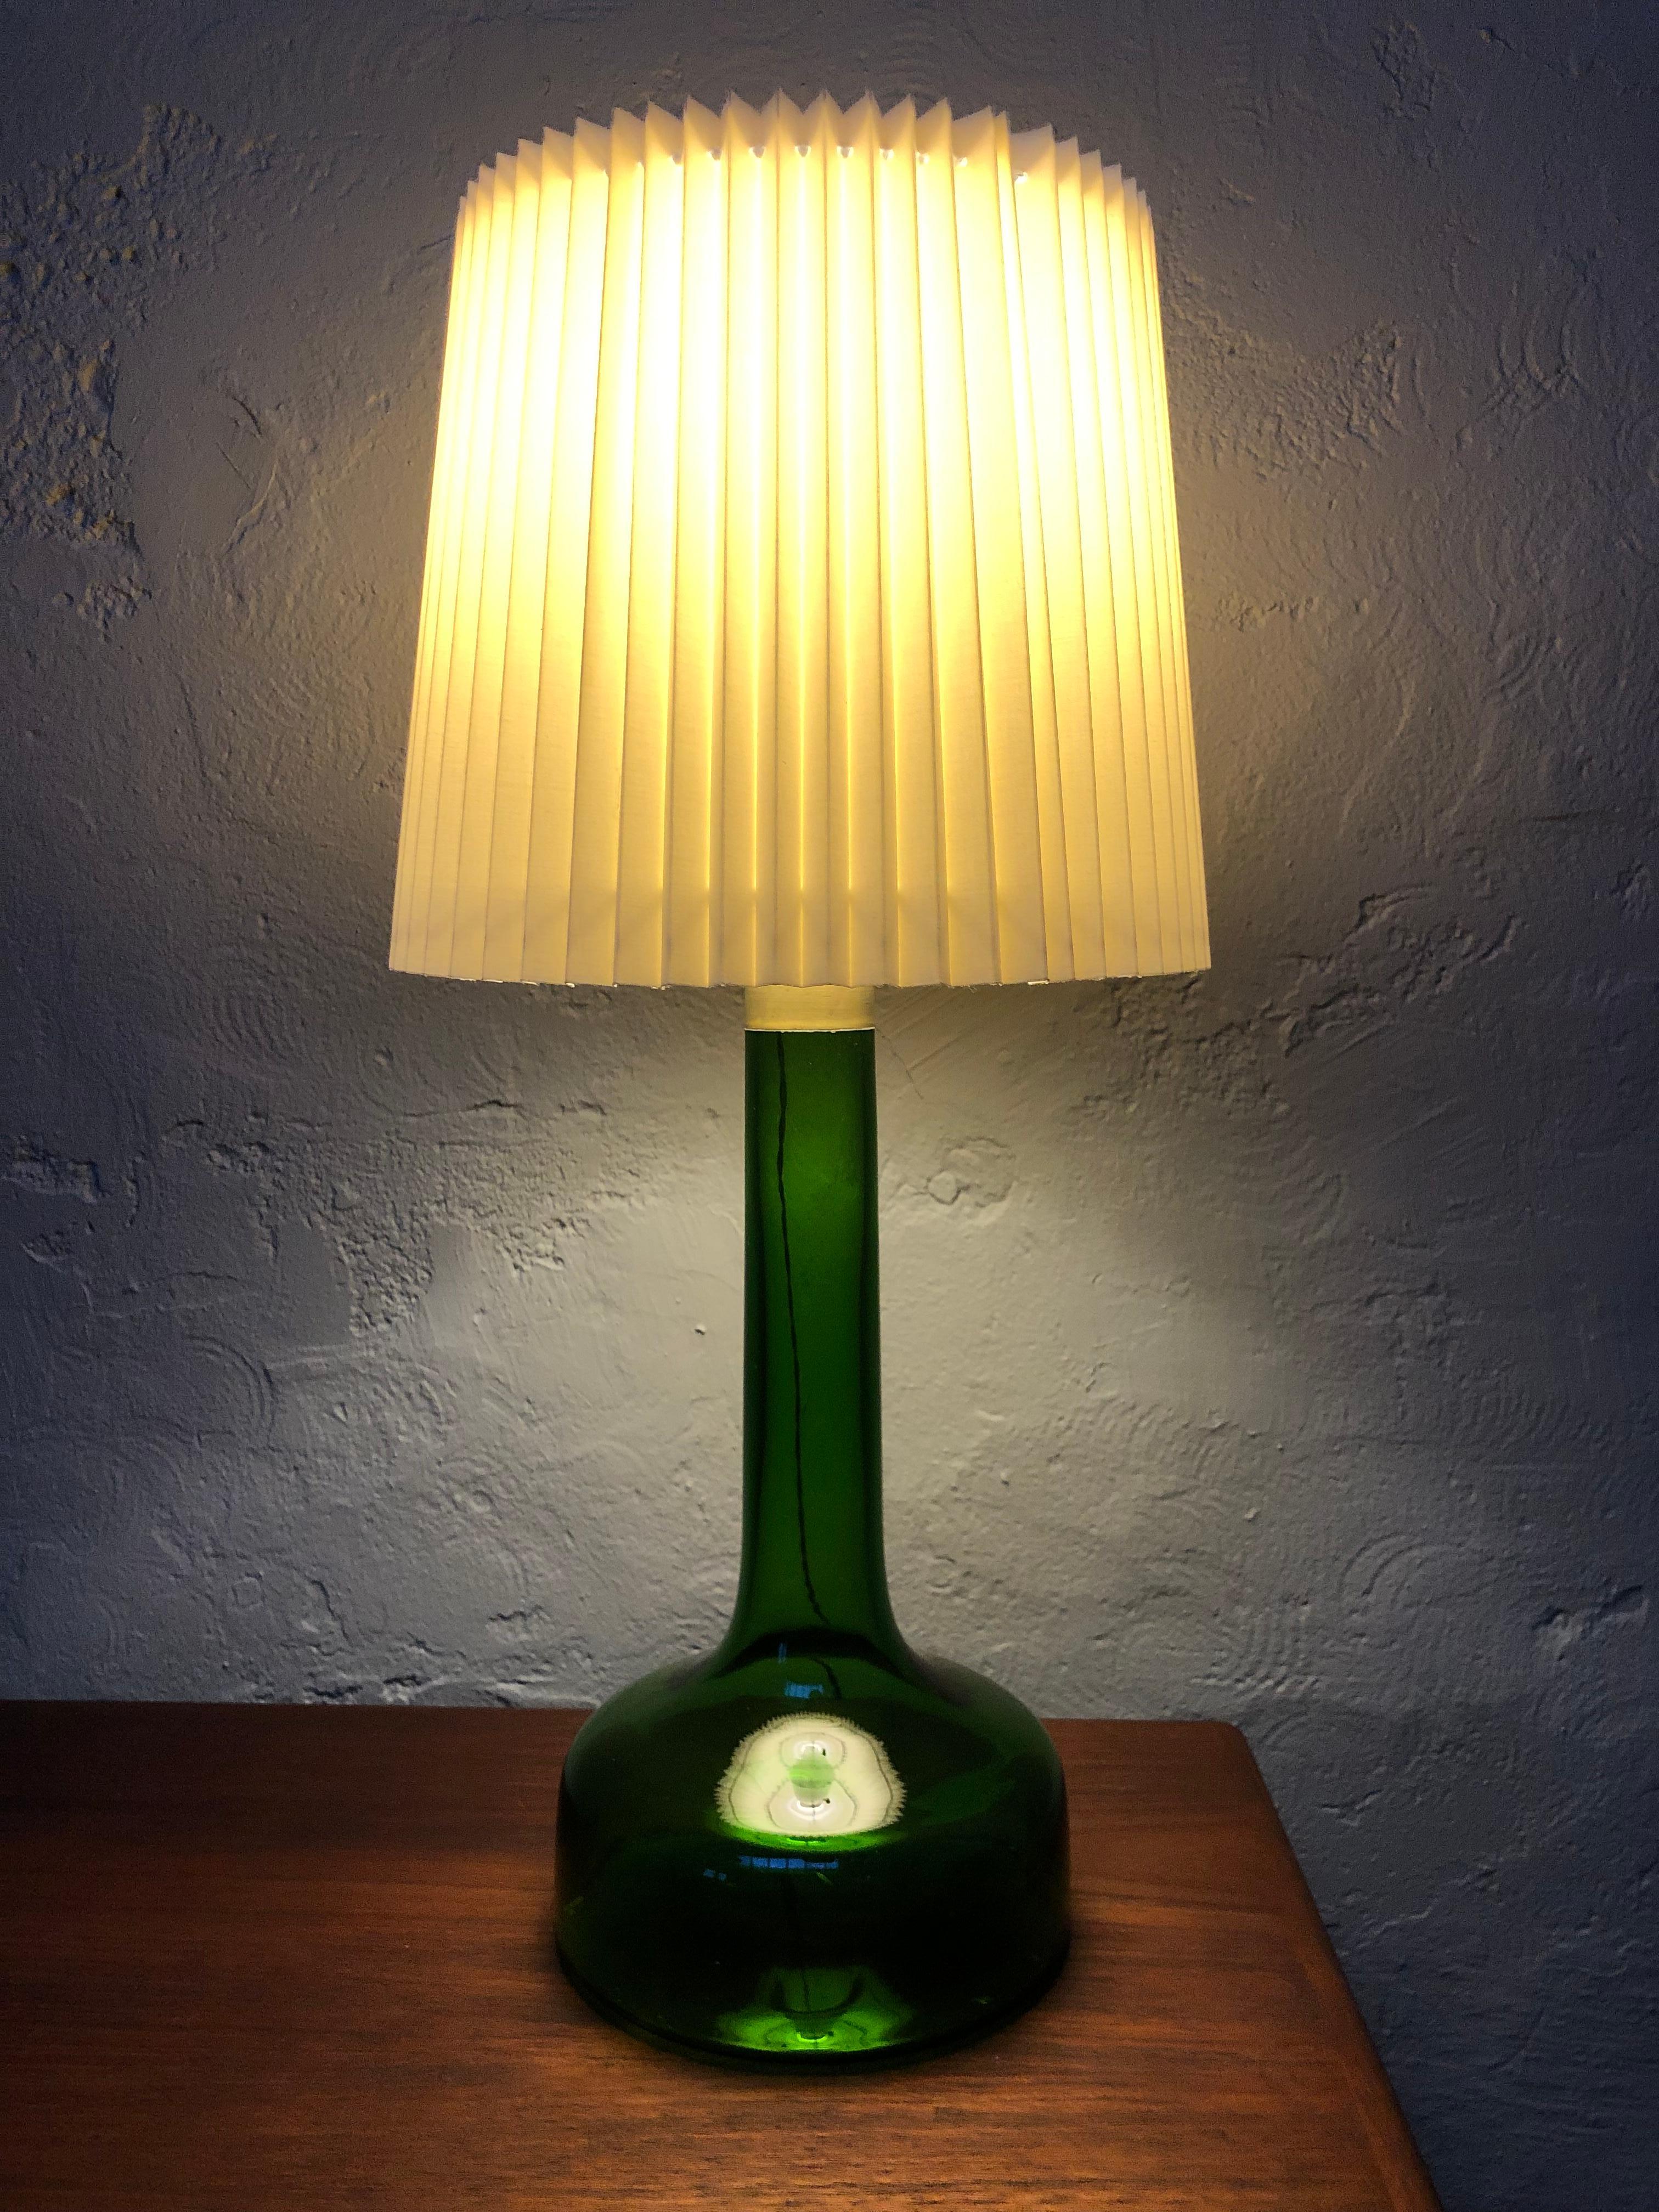 A vintage hand blown glass table lamp designed by Biilman-Petersen for Le Klint of Denmark in 1948. 
The green glass is in great vintage condition with some slight dust inside the lamp. 
It has been rewired with twisted black cloth flex and